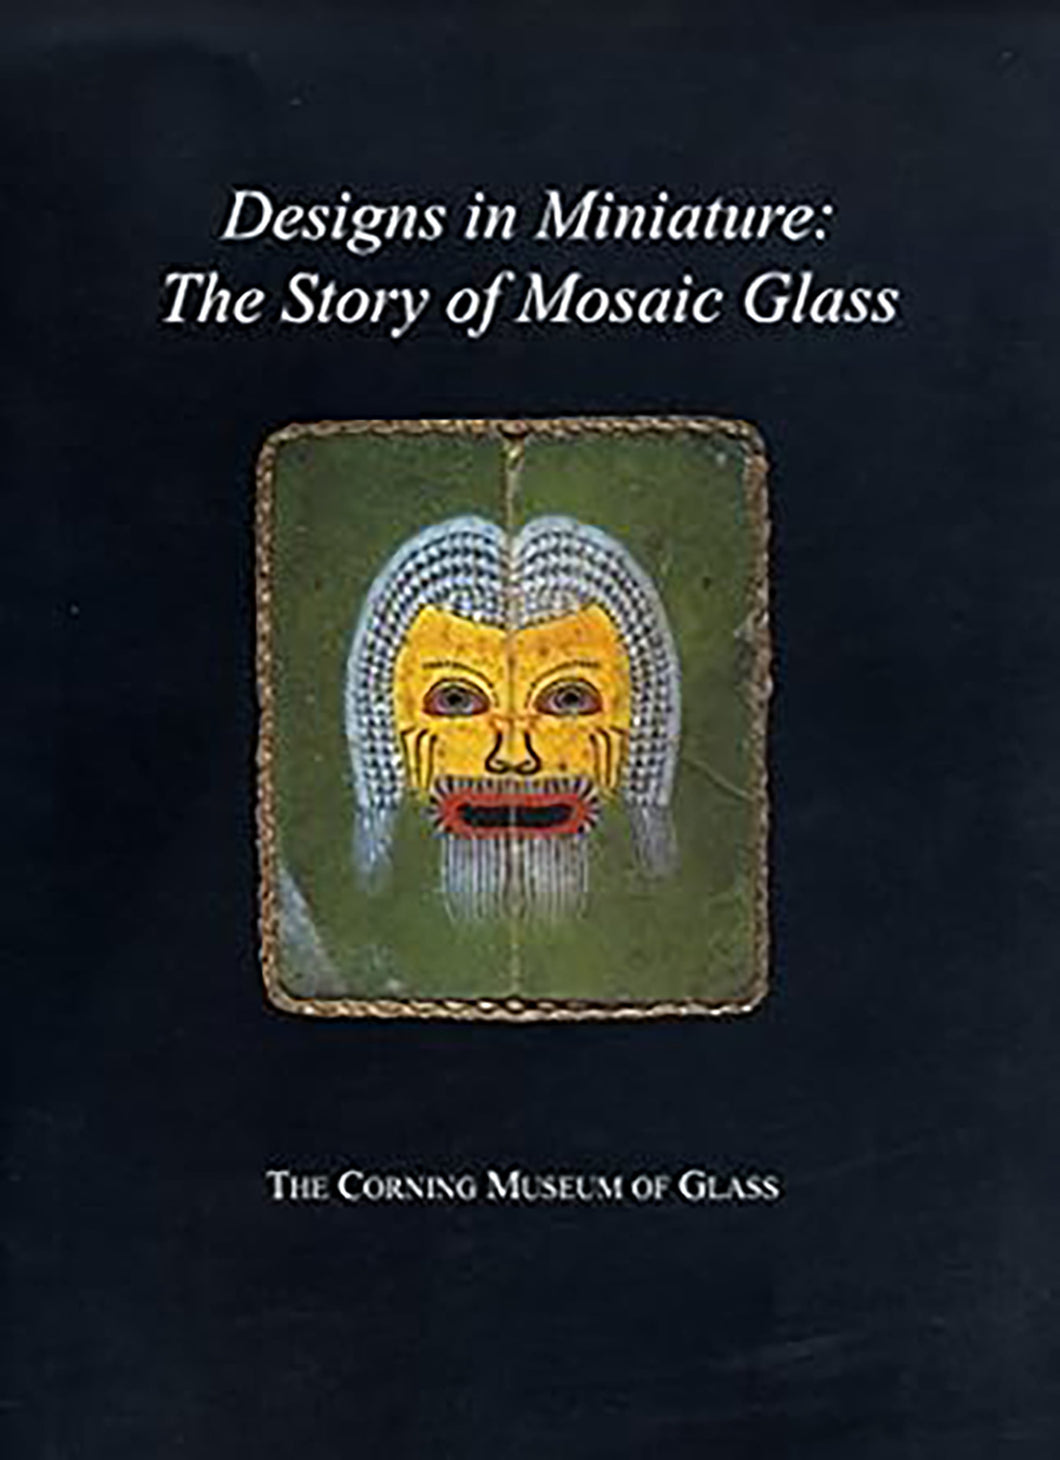 Designs in Miniature: The Story of Mosaic Glass